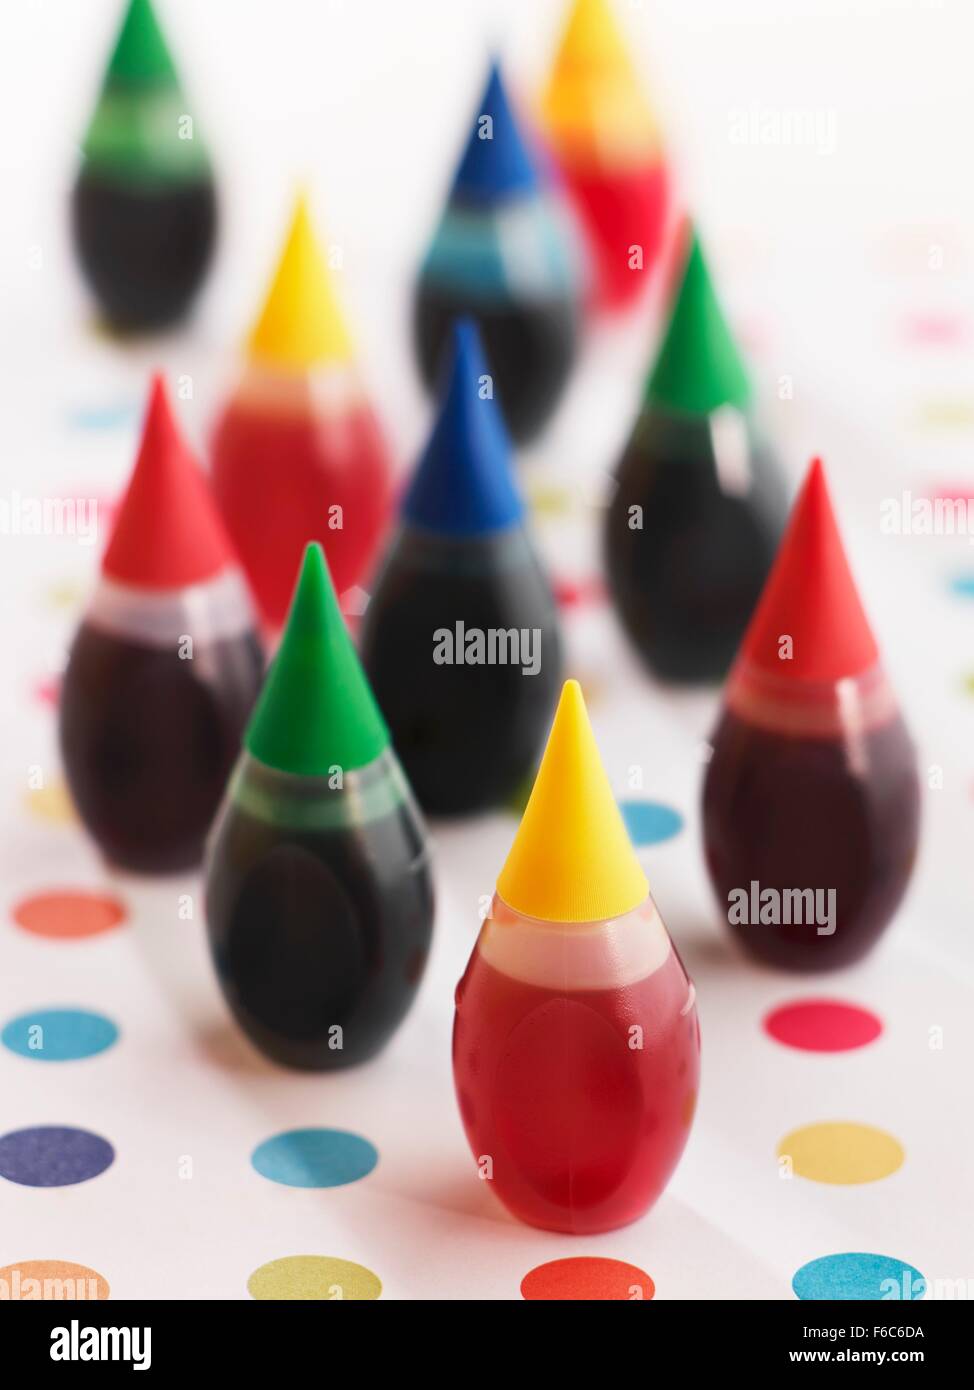 Food Coloring Bottles on Polk-a-Dot Surface Stock Photo